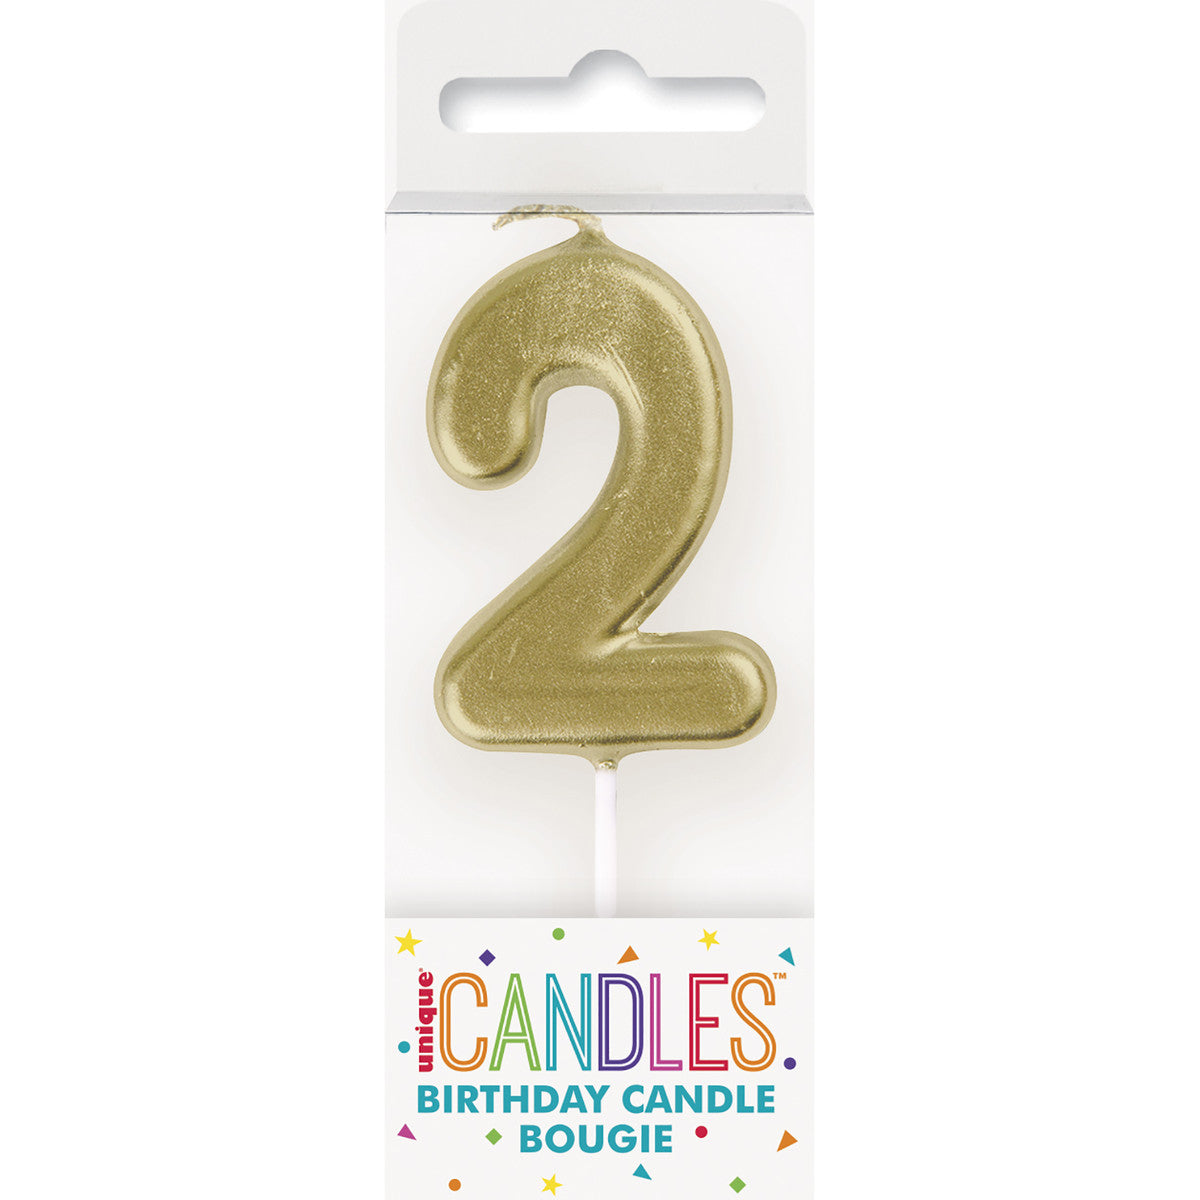 Mini Gold Numeral Pick Candles - 2